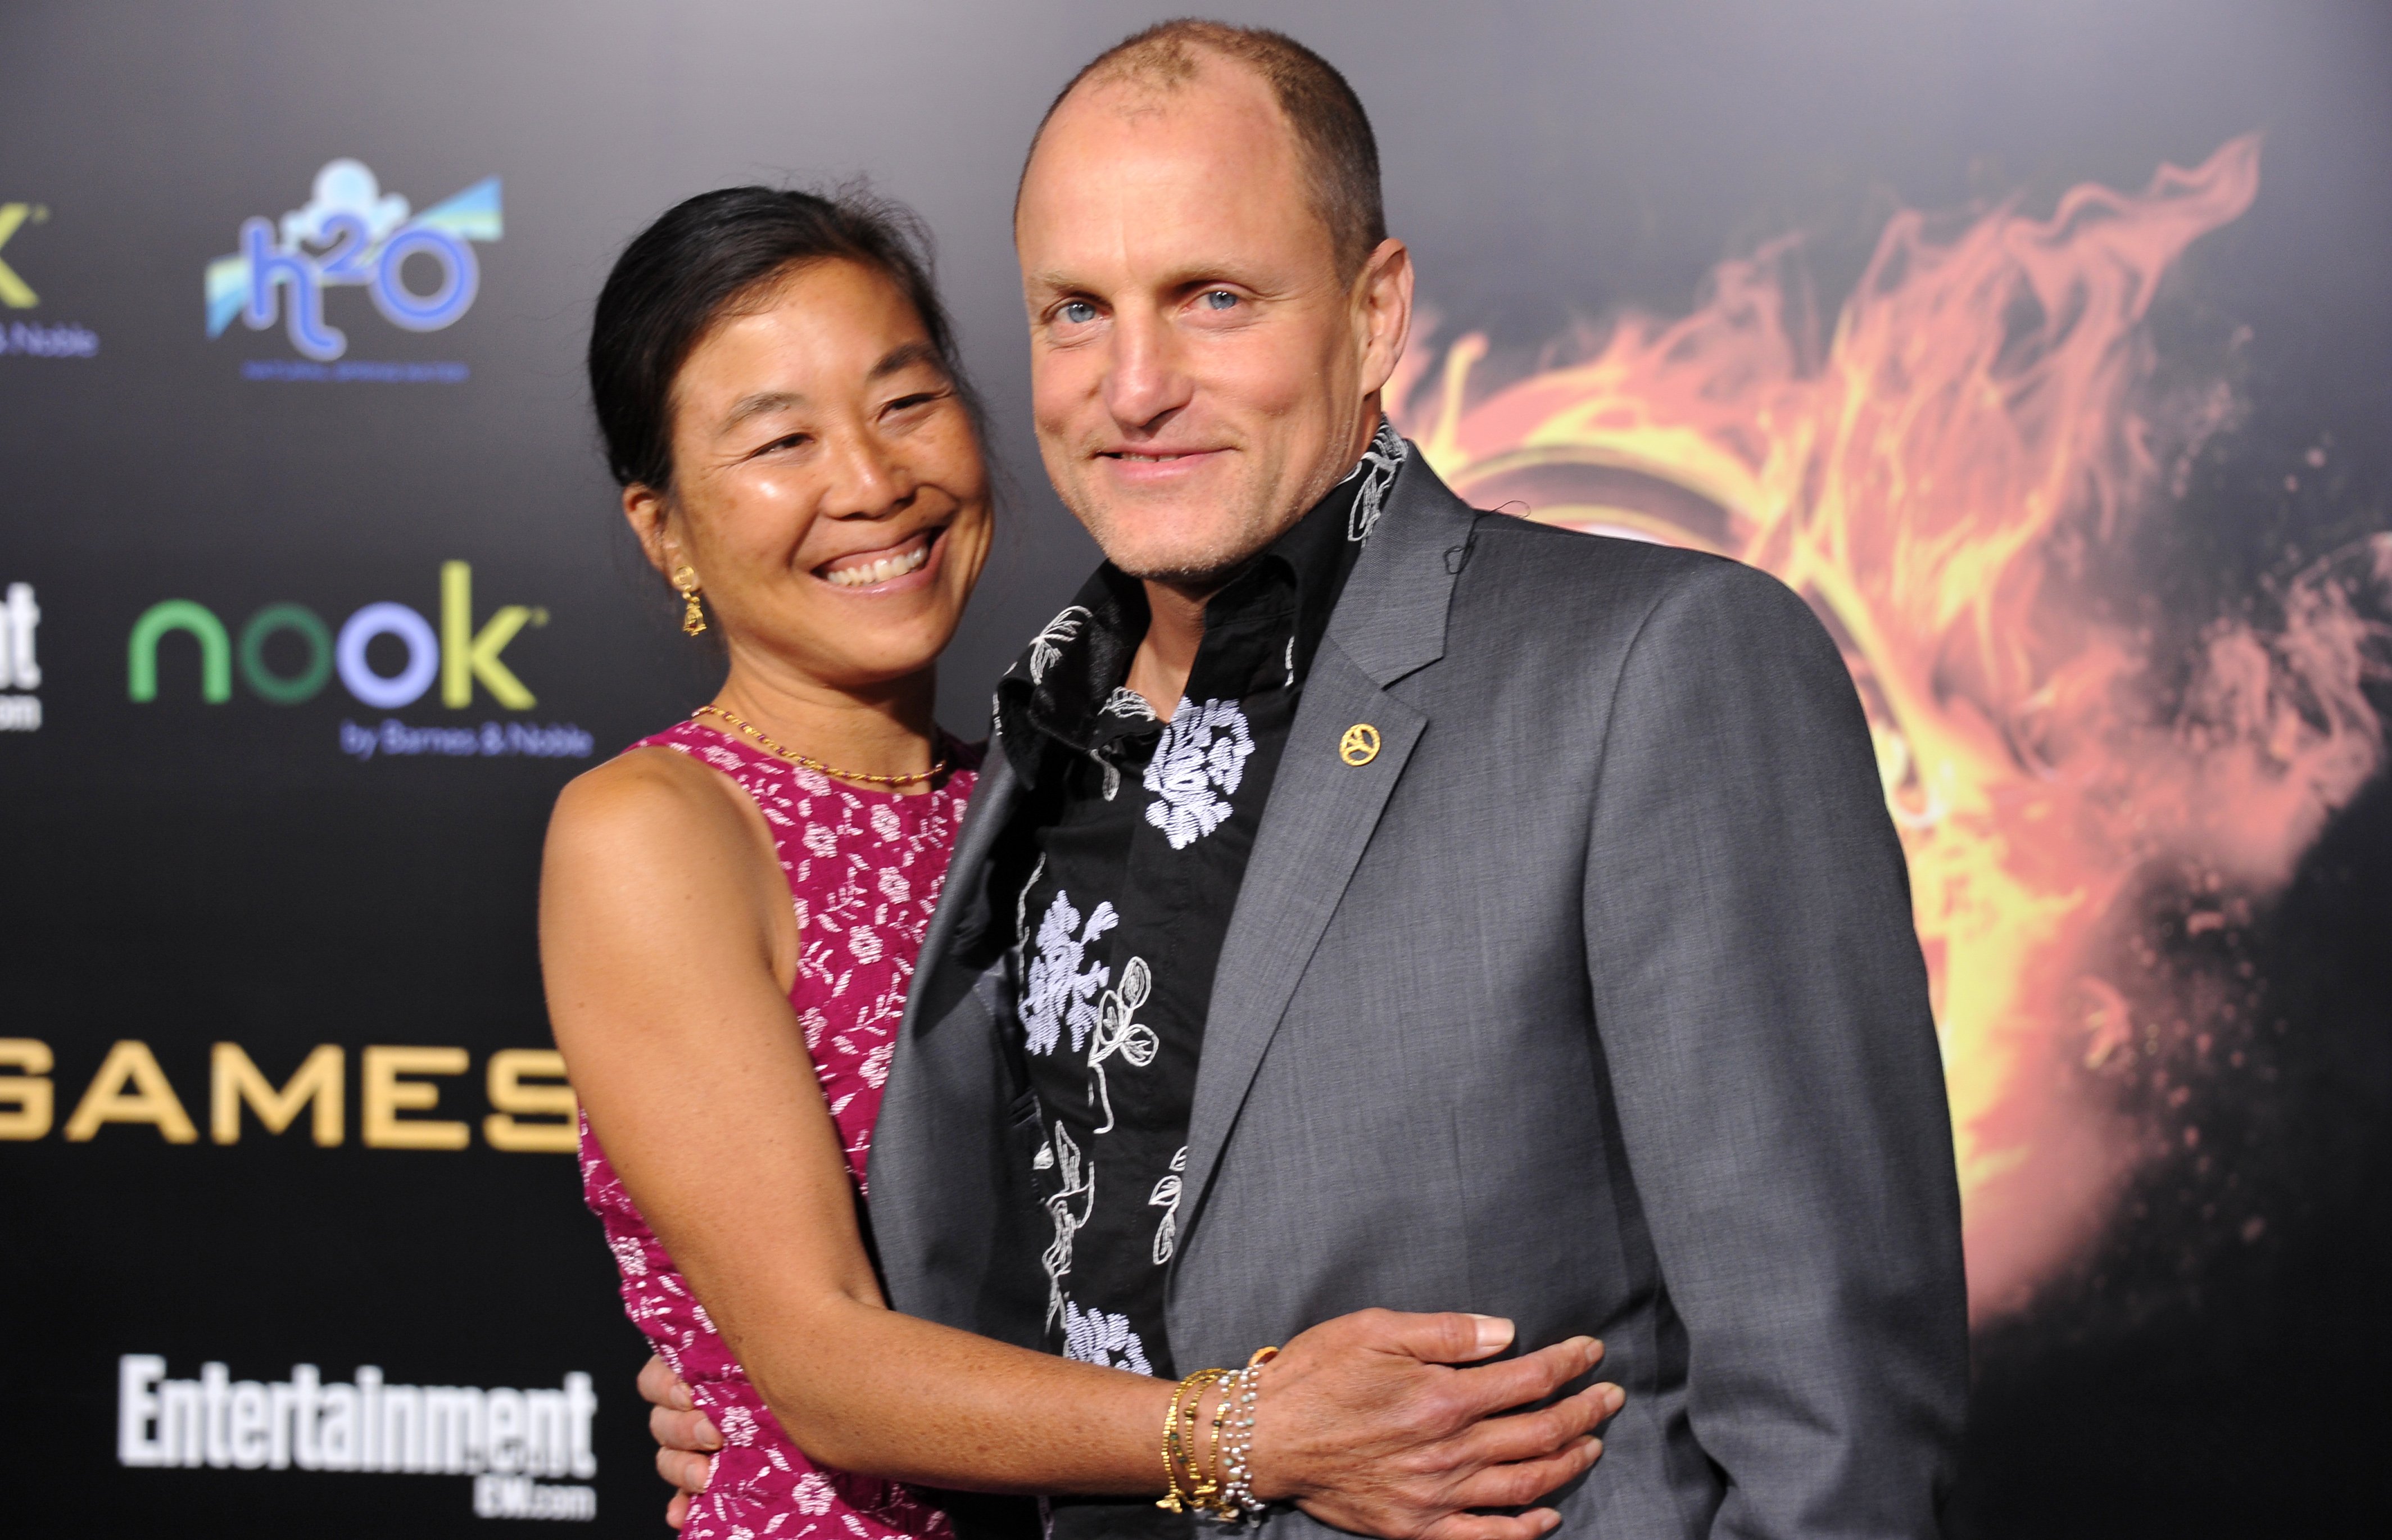 Woody Harrelson and Laura Louie at the premiere of "The Hunger Games" in 2012 in Los Angeles, California. | Source: Getty Images